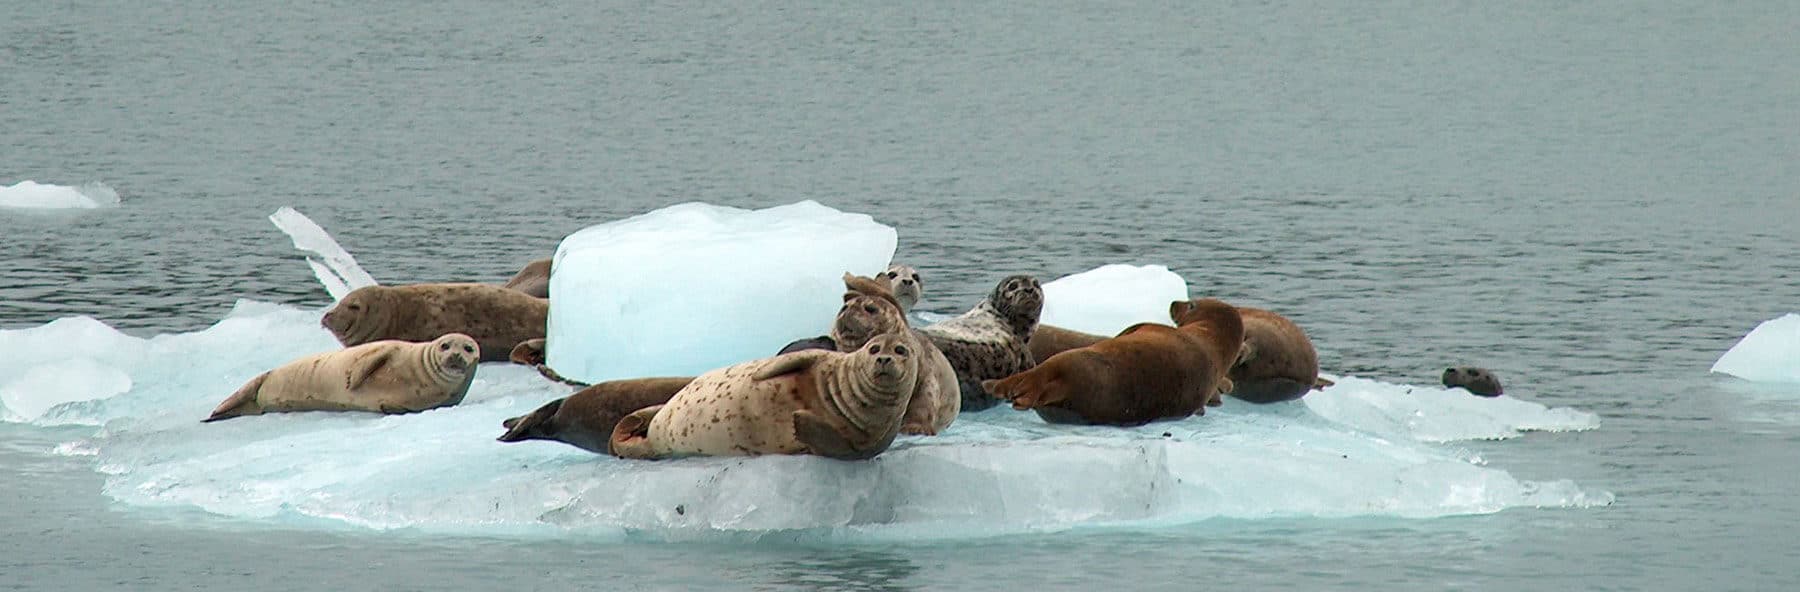 Seals hauled out on an iceberg.